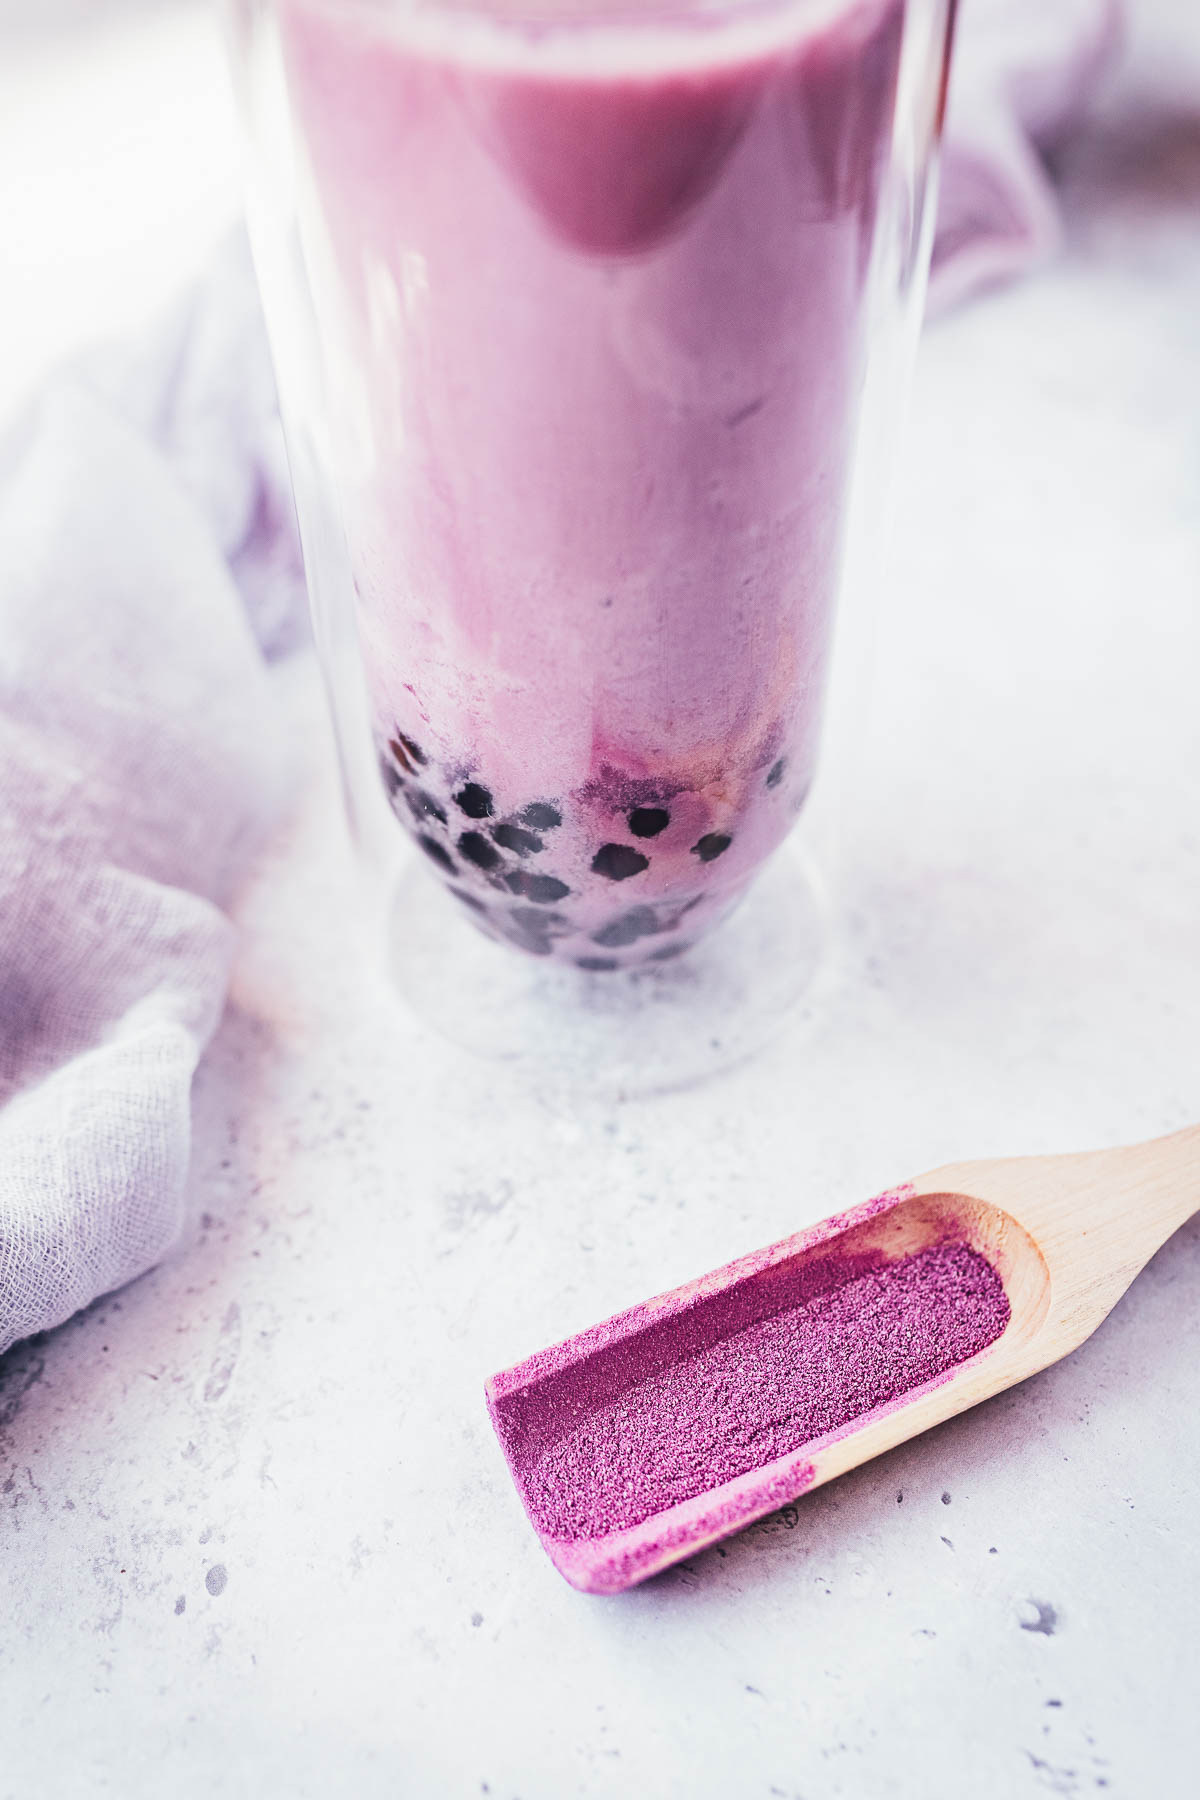 Taro Milk Tea in a clear glass with black tapioca pearls at the bottom, next to a scoop of purple taro powder.